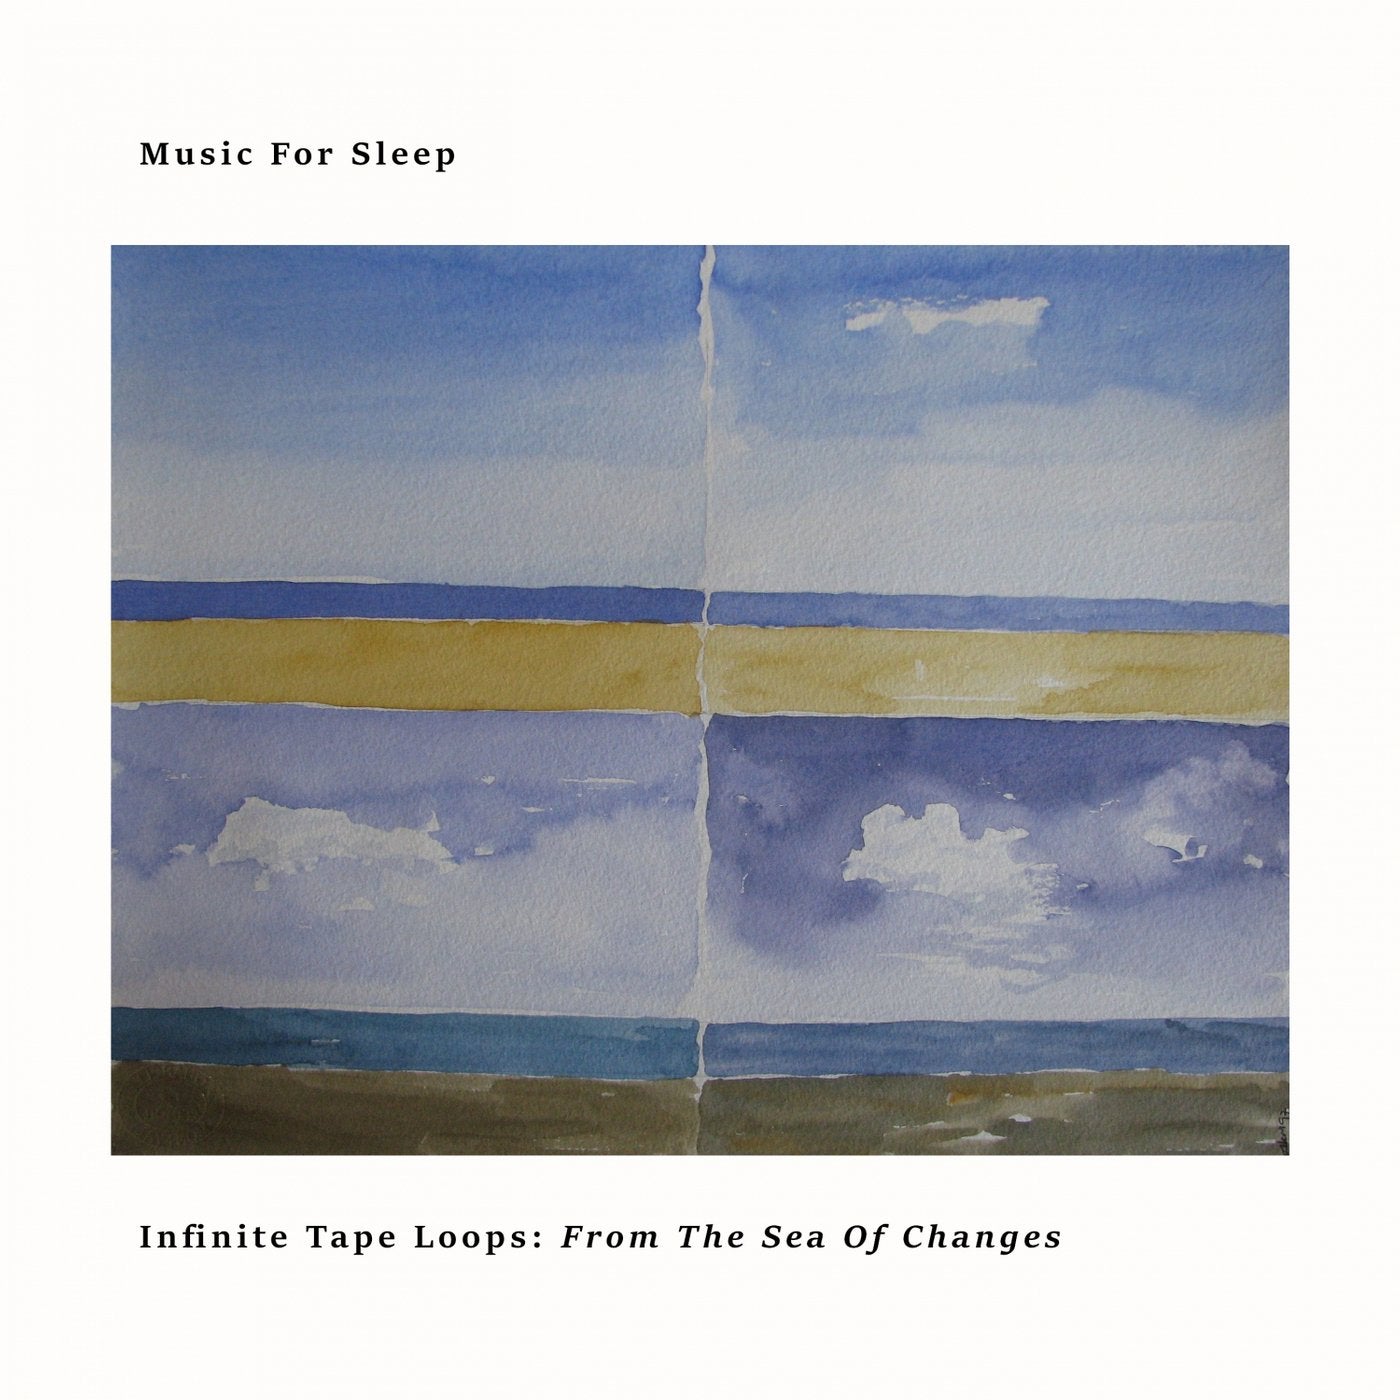 Infinite Tape Loops: From The Sea Of Changes